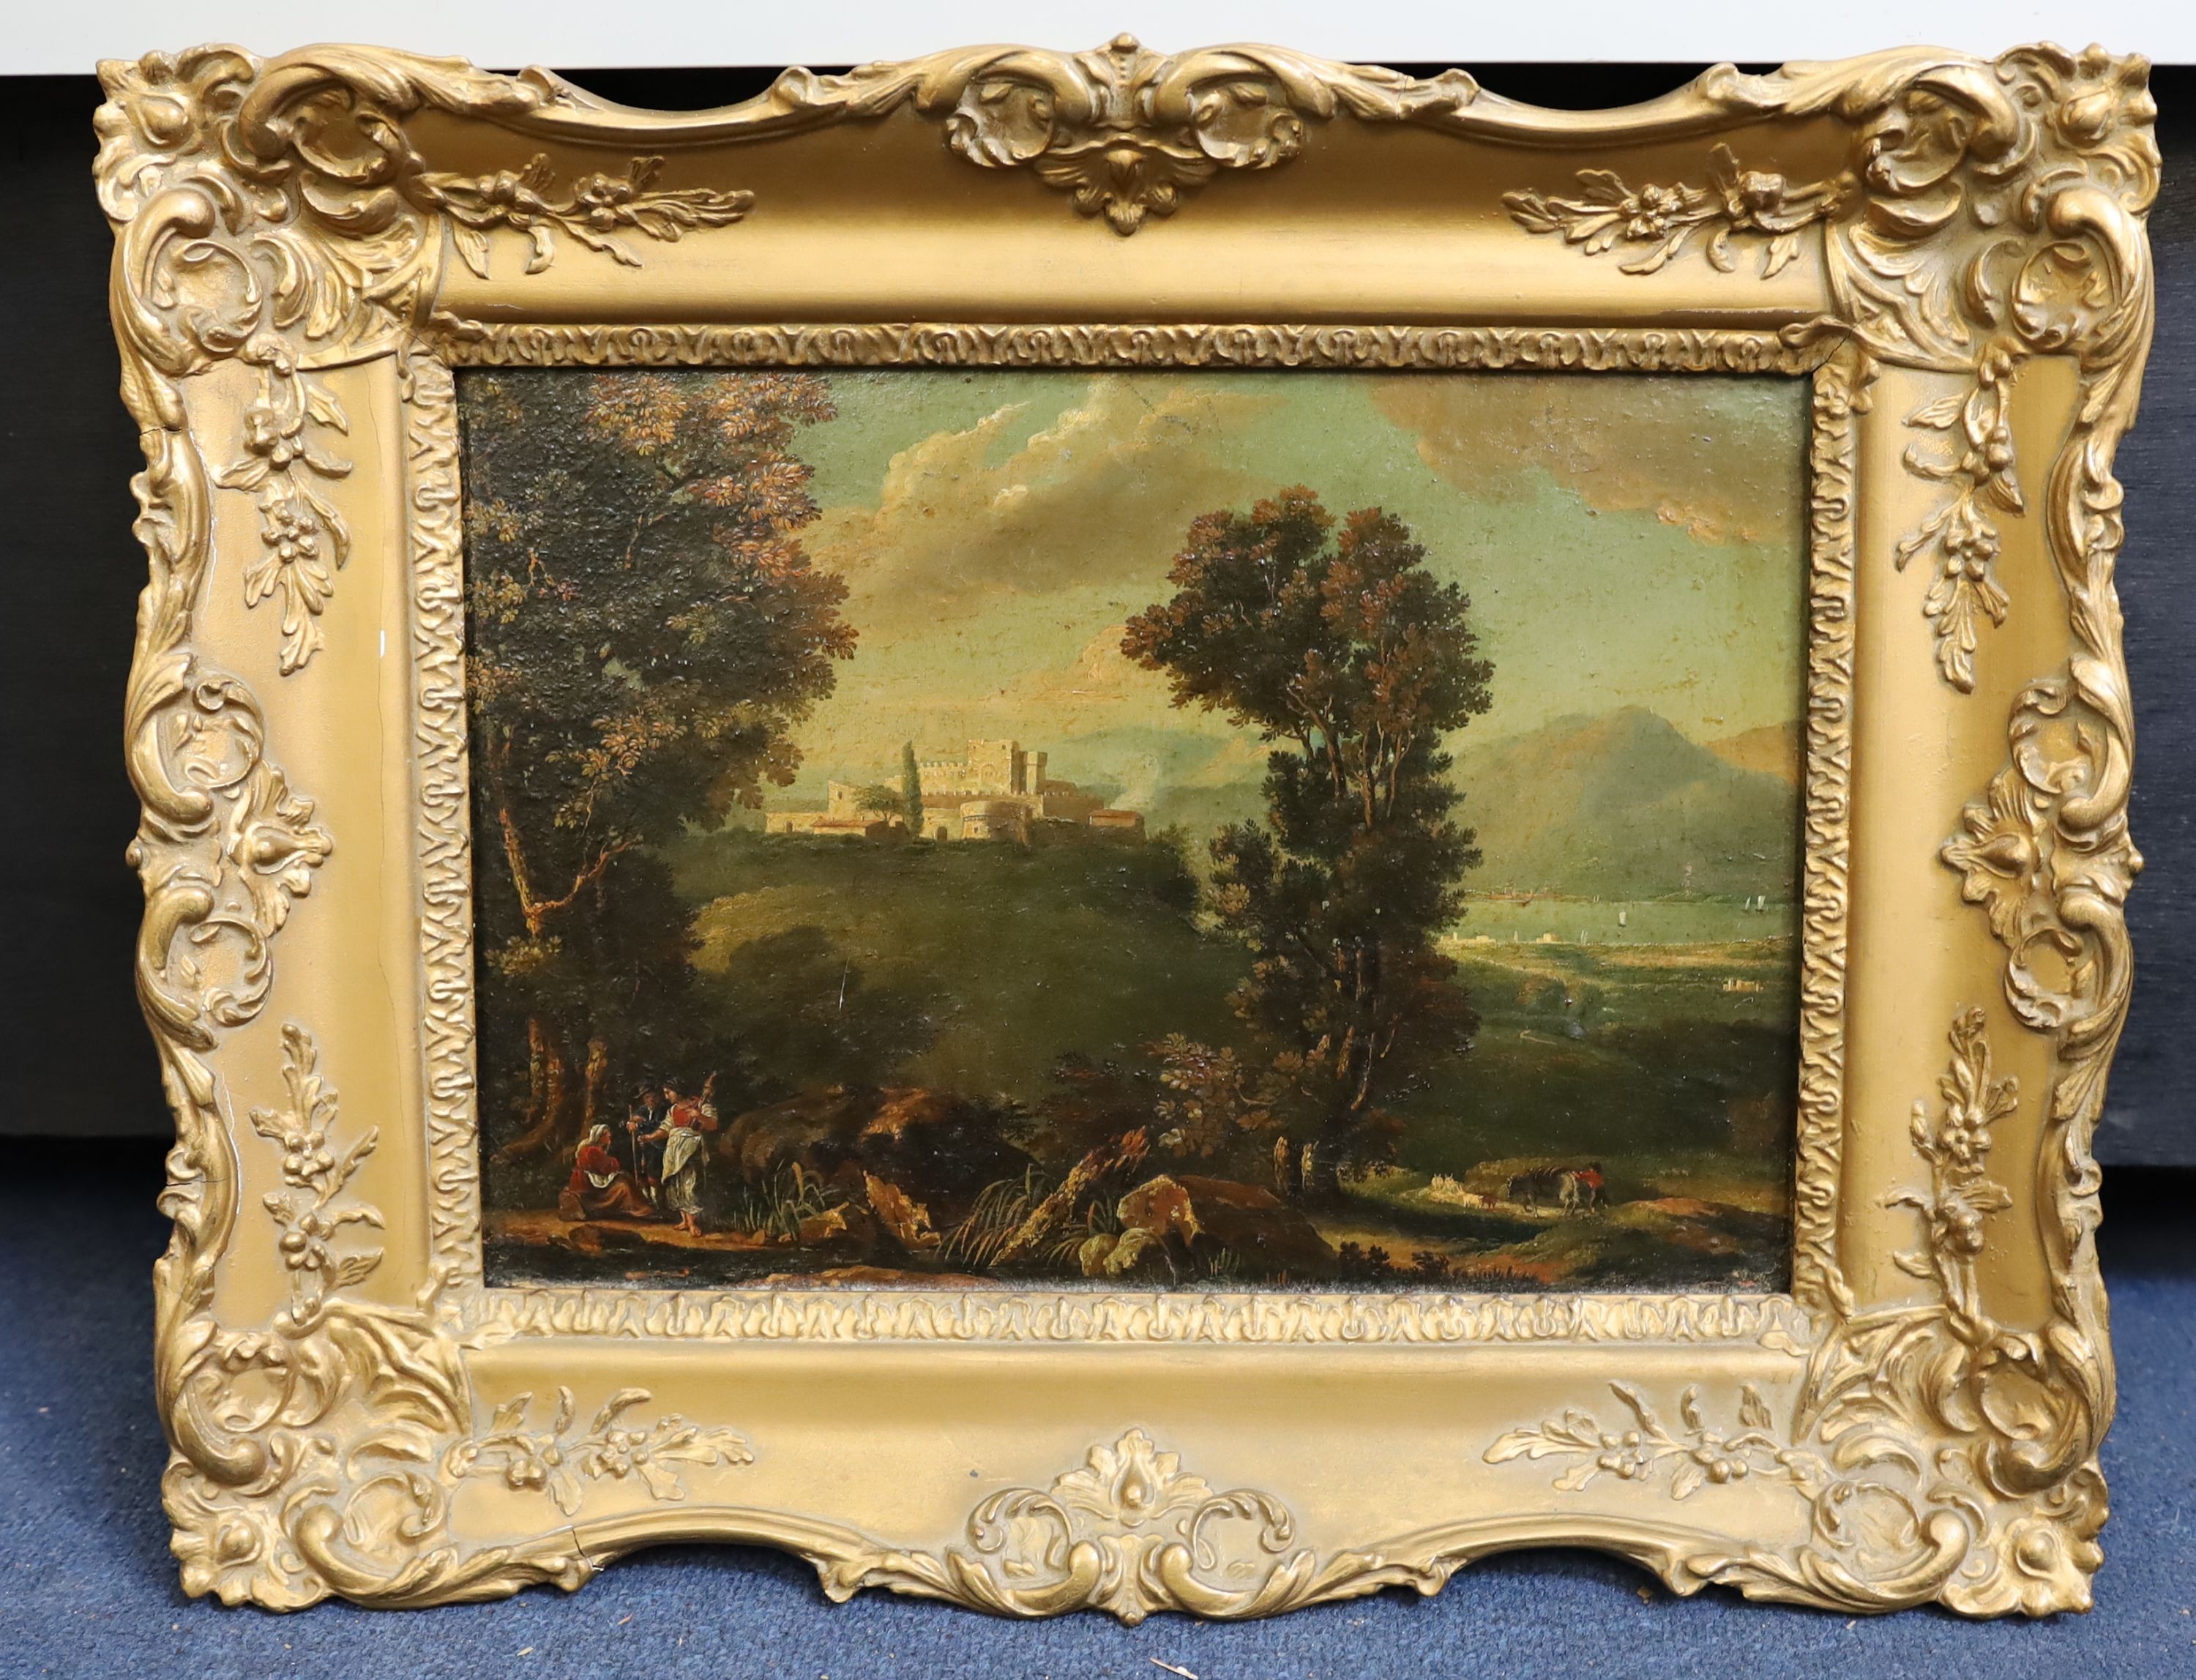 Early 19th century Italian School, Figures in a landscape with castle beyond, oil on canvas, 24 x 34.5cm